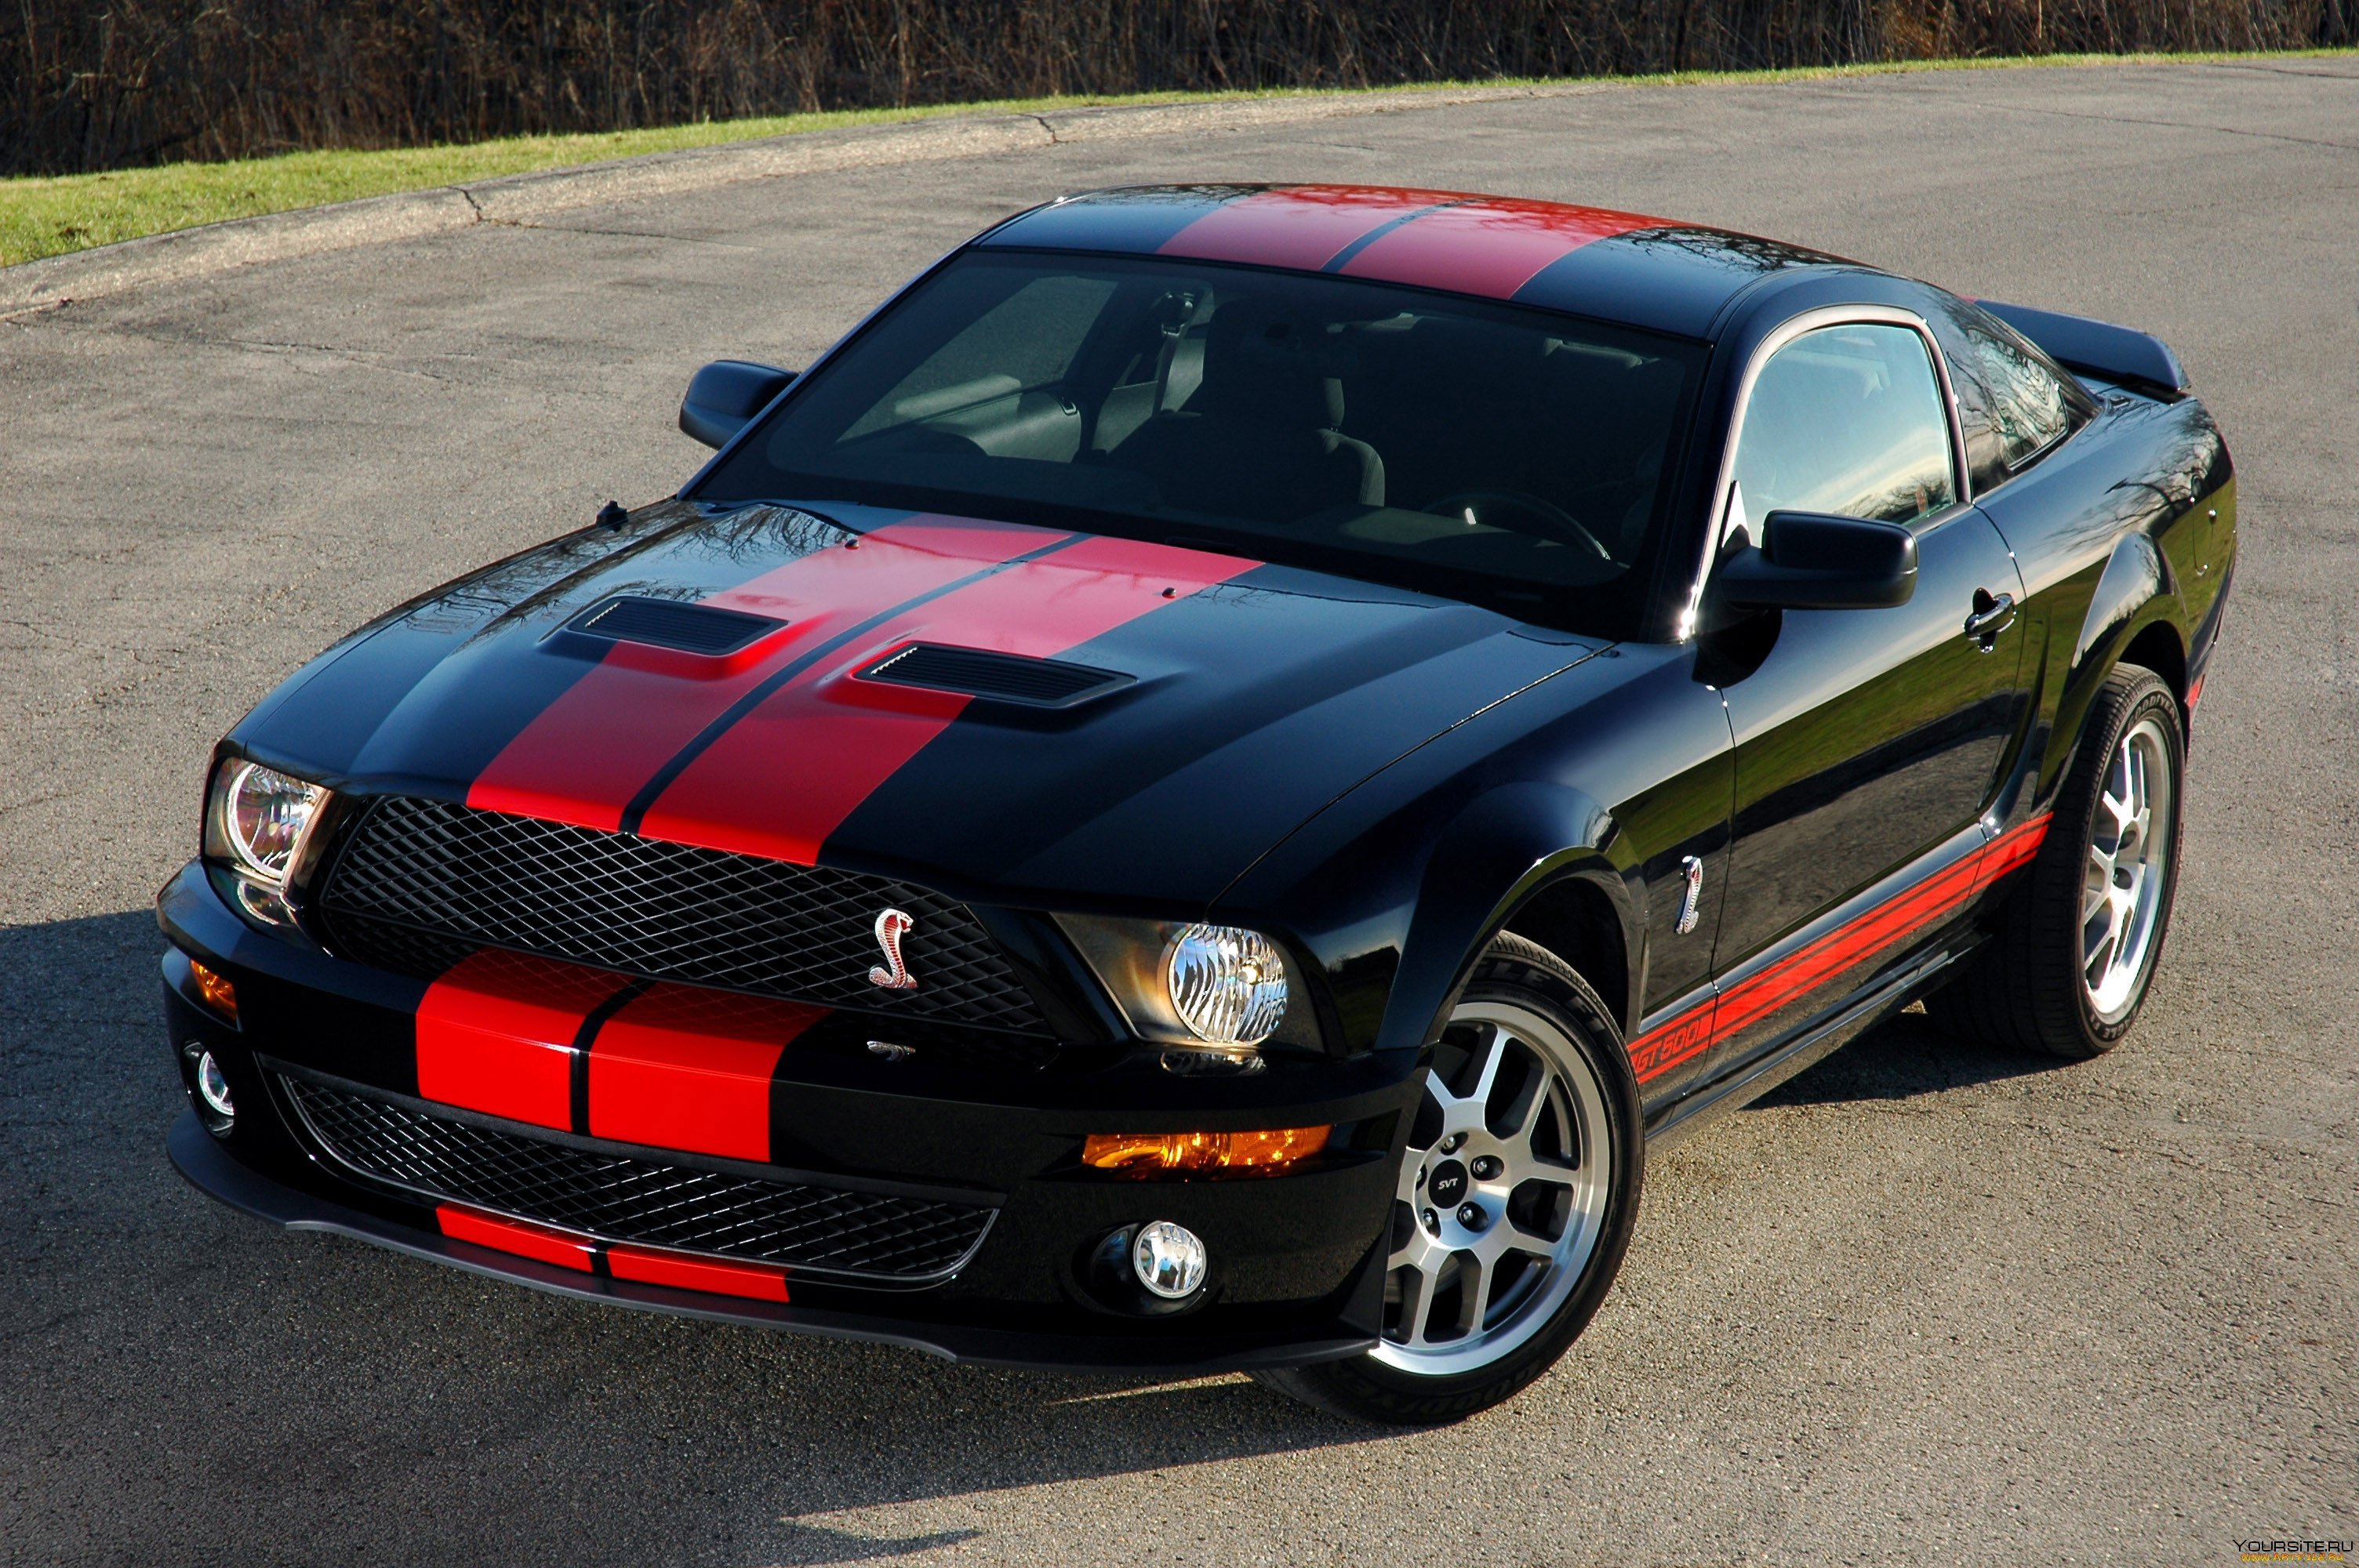 Форд Мустанг gt 500. Ford Shelby gt500. Форд Мустанг gt 500 Shelby. Ford Mustang Shelby gt500 Red.